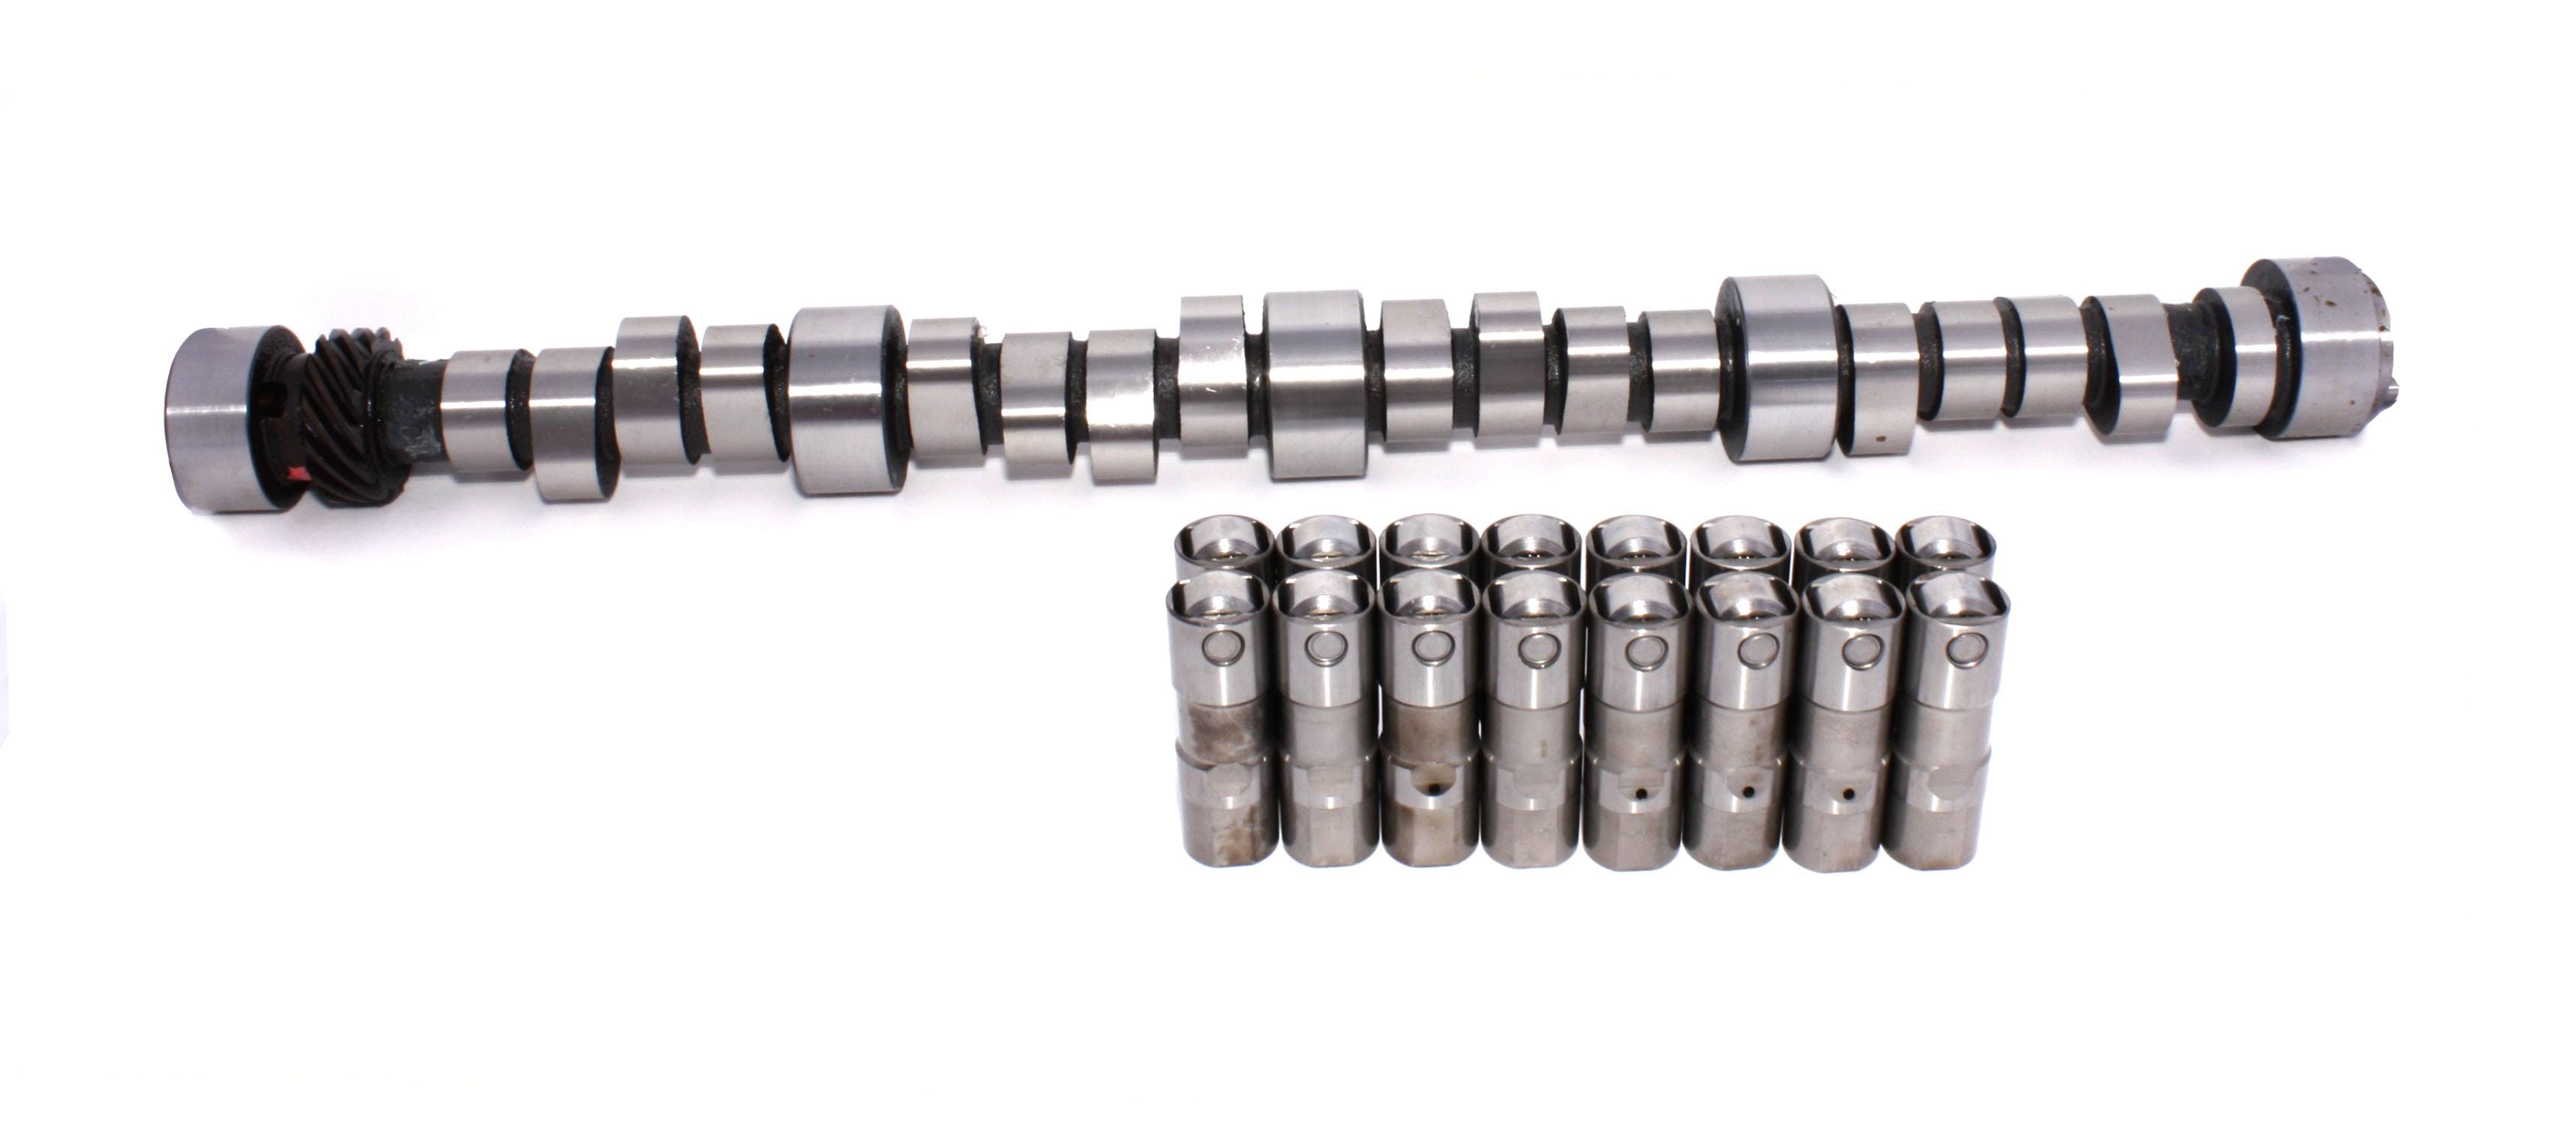 Competition Cams CL01-601-8 MUTHA THUMPR 235/249 HYD ROLLER CAM/LIFTER KIT CHEVROLET BIG BLOCK GEN VI